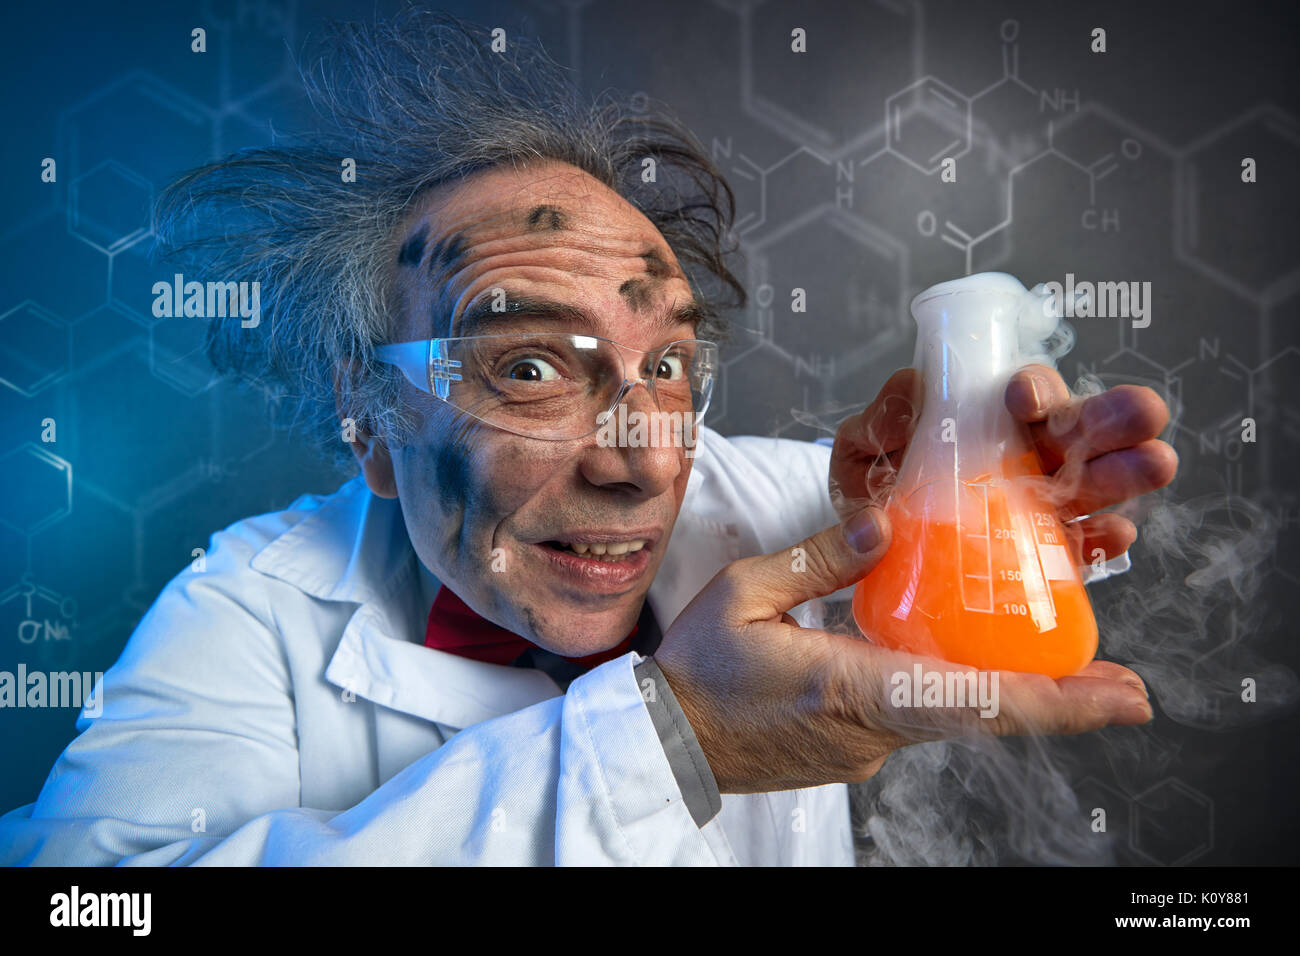 scientist with the dirty face of the explosion holding tube with chemicals Stock Photo